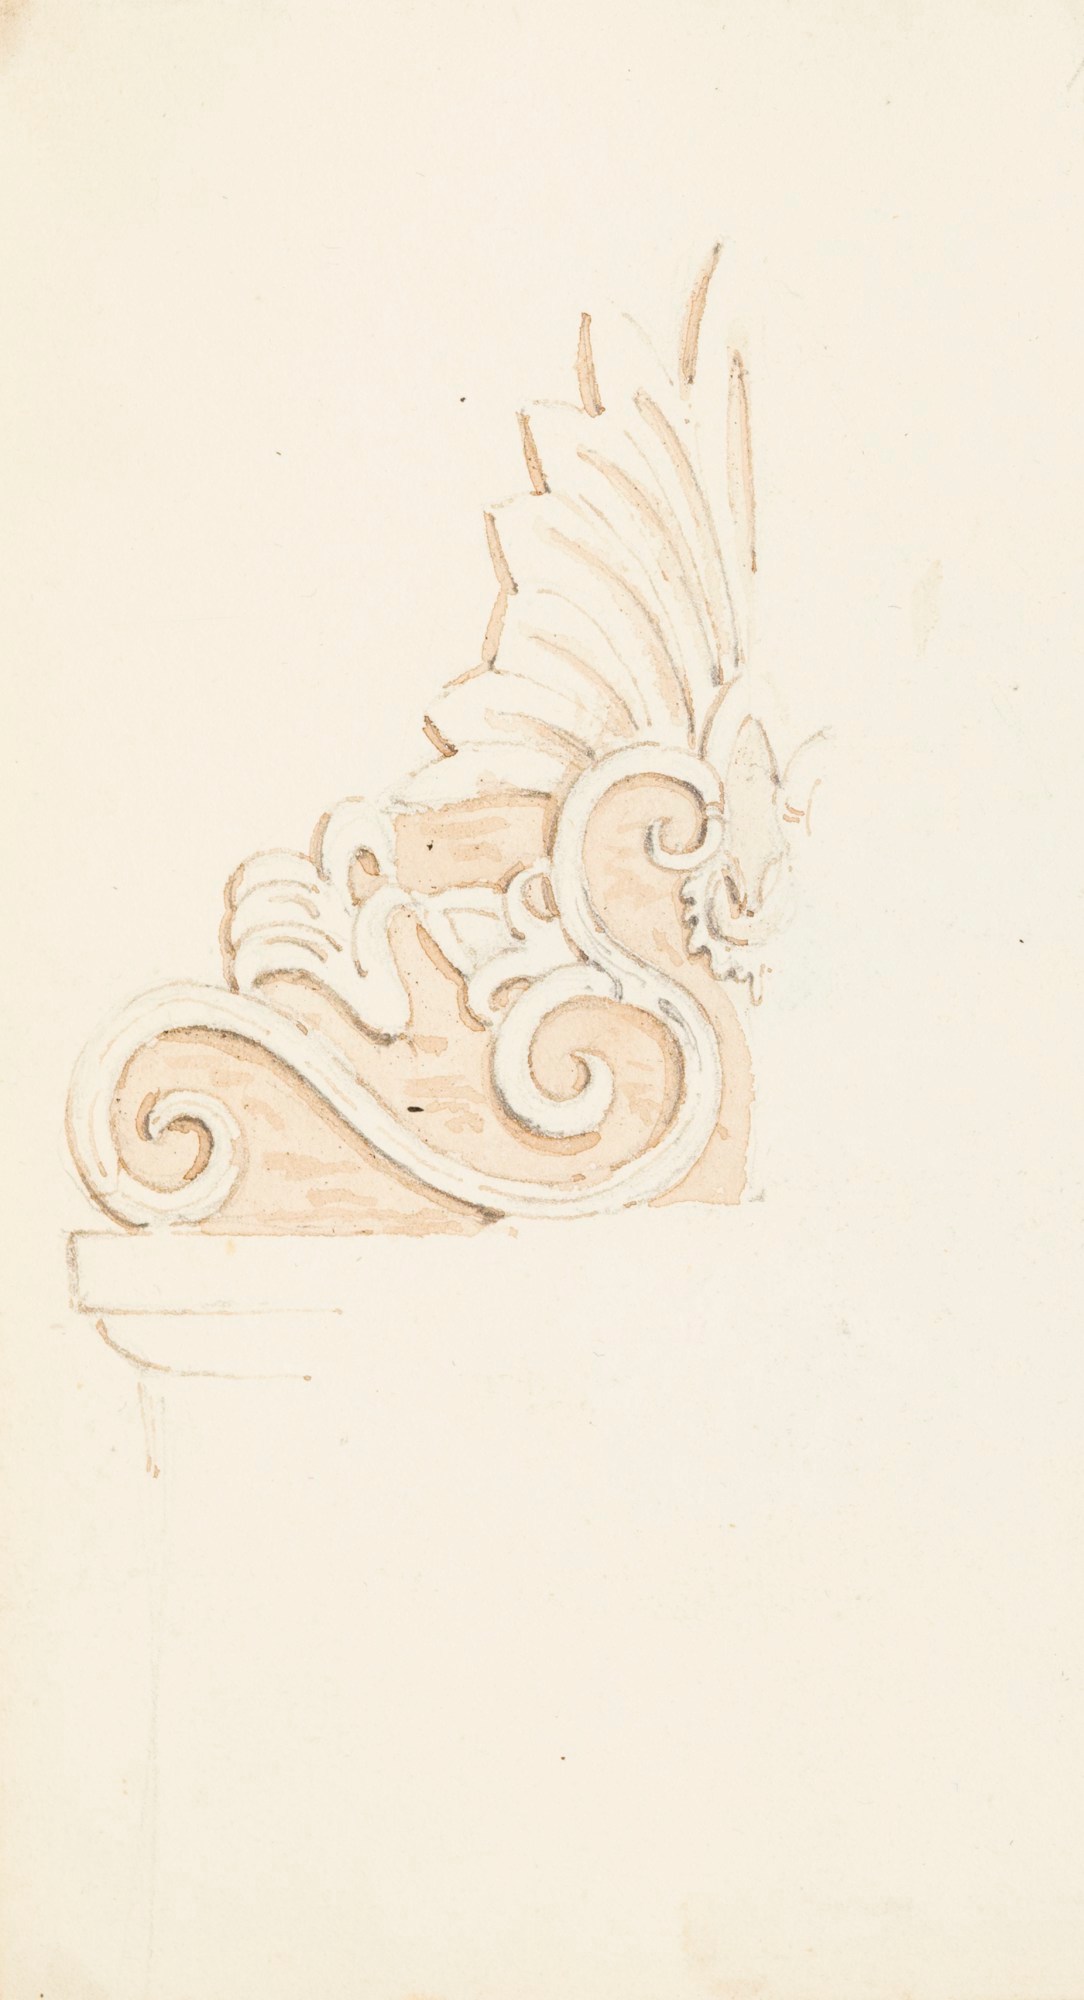 Wood carving shows an arrangement of the vine Vector Image